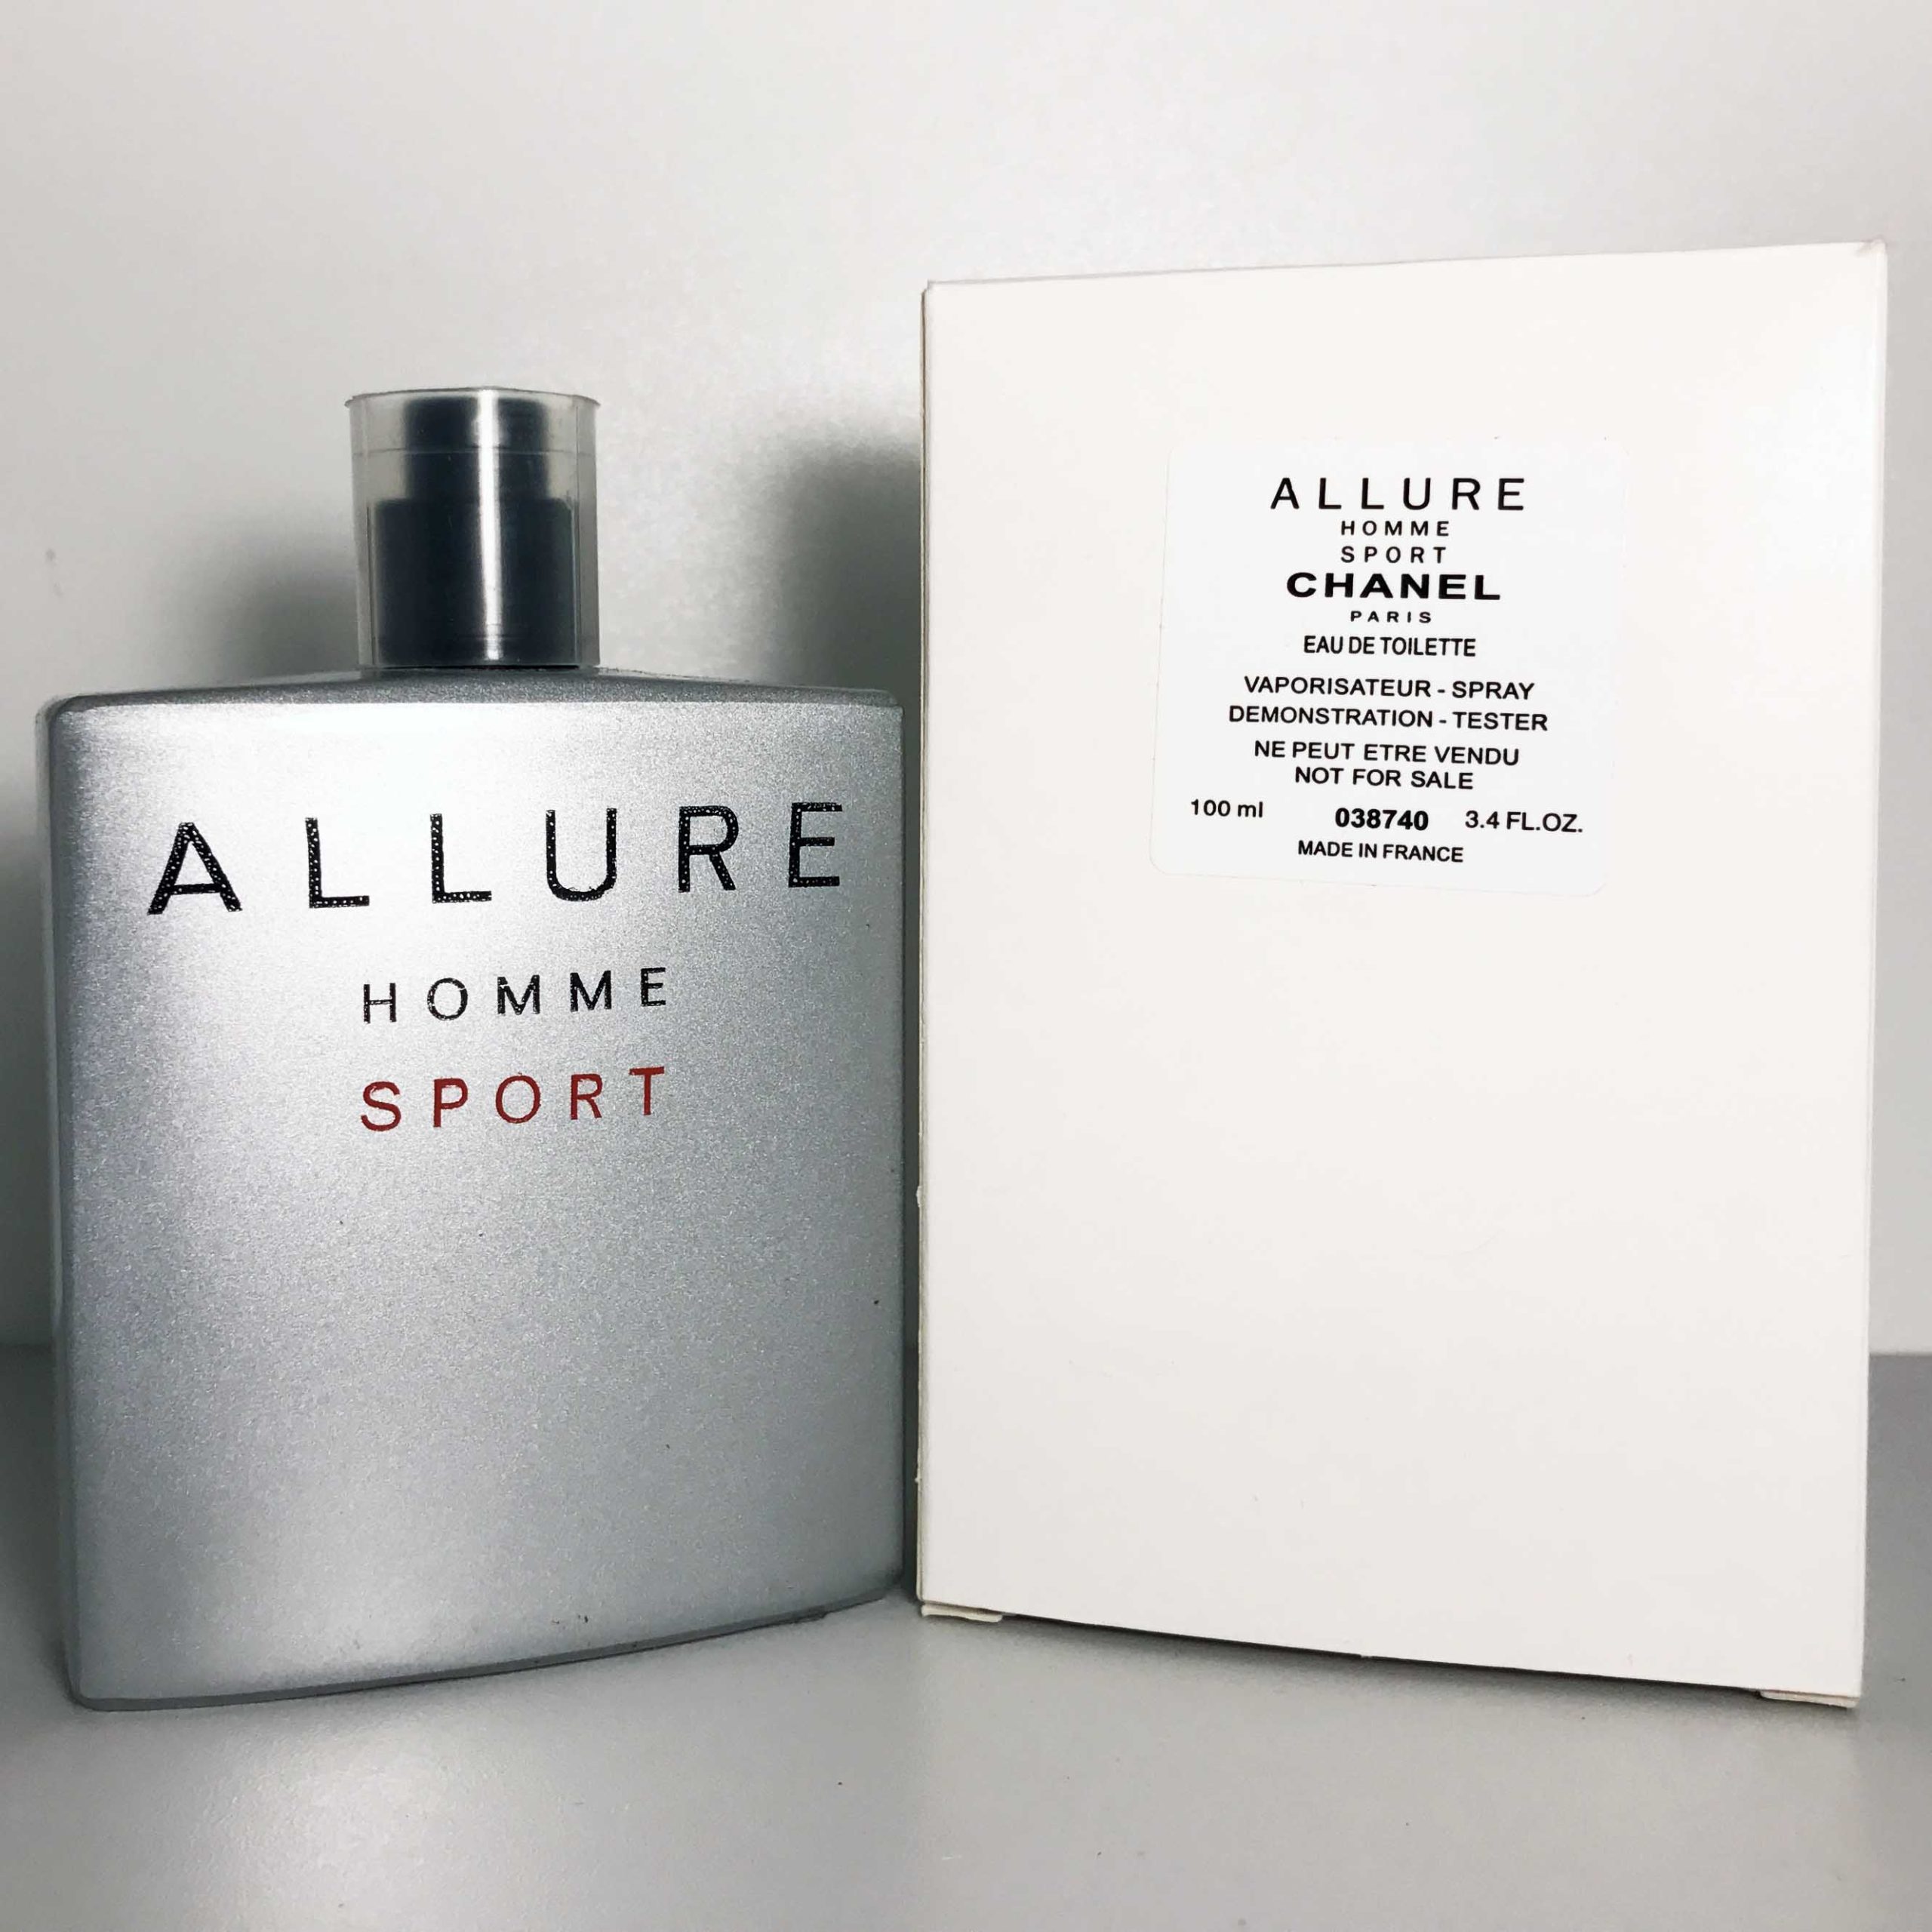 Духи allure homme. Chanel Allure homme Sport. Allure Sport Chanel 100 мл. Chanel Allure Sport. Chanel Allure homme Sport 100ml.